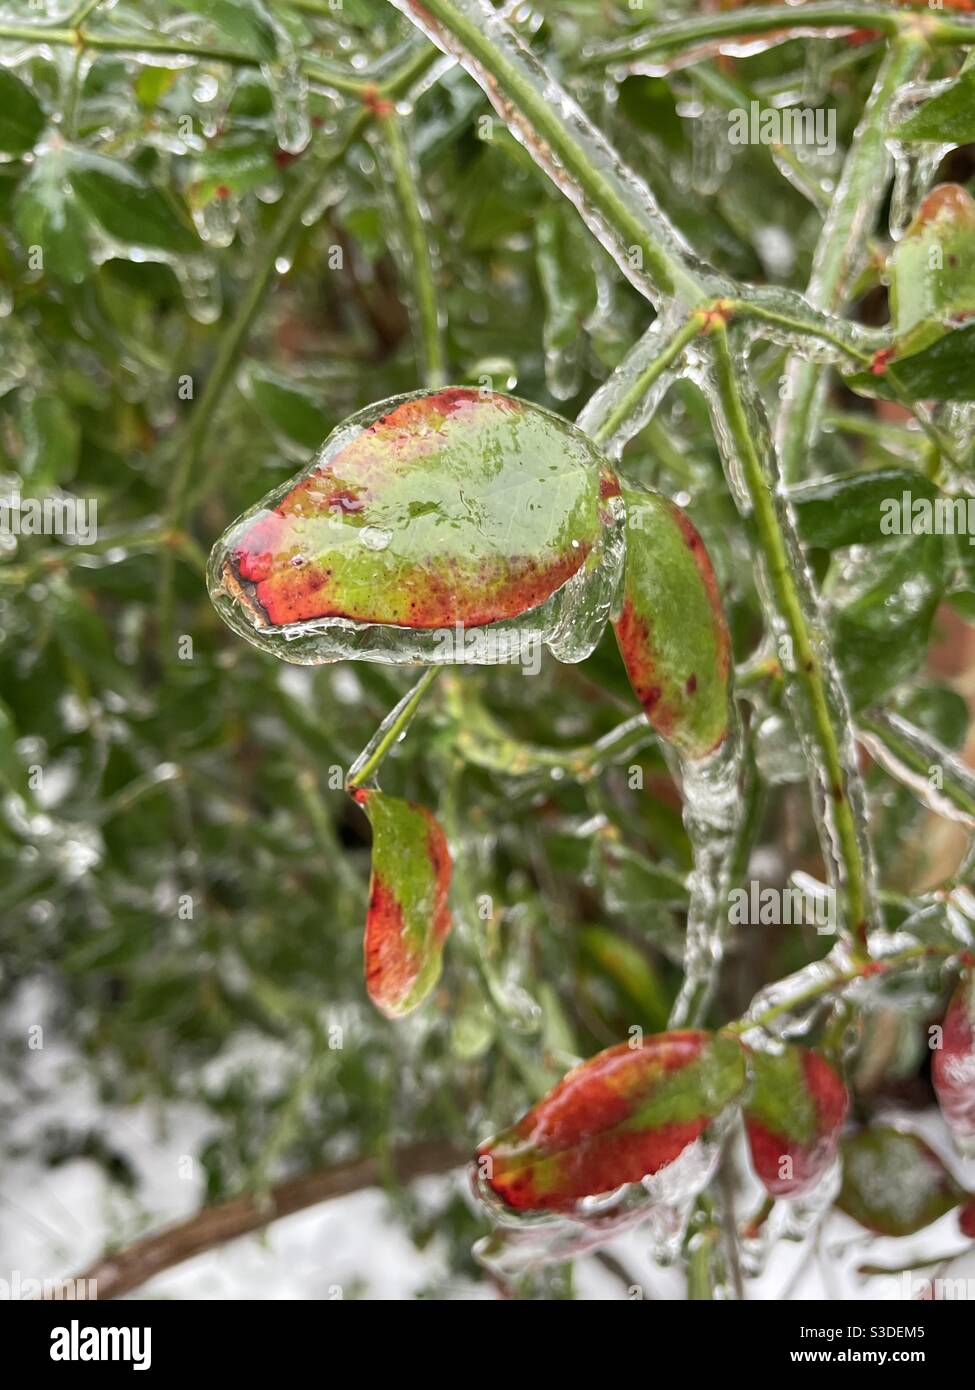 A green plant leaf is fully covered in ice from a winter storm. Stock Photo